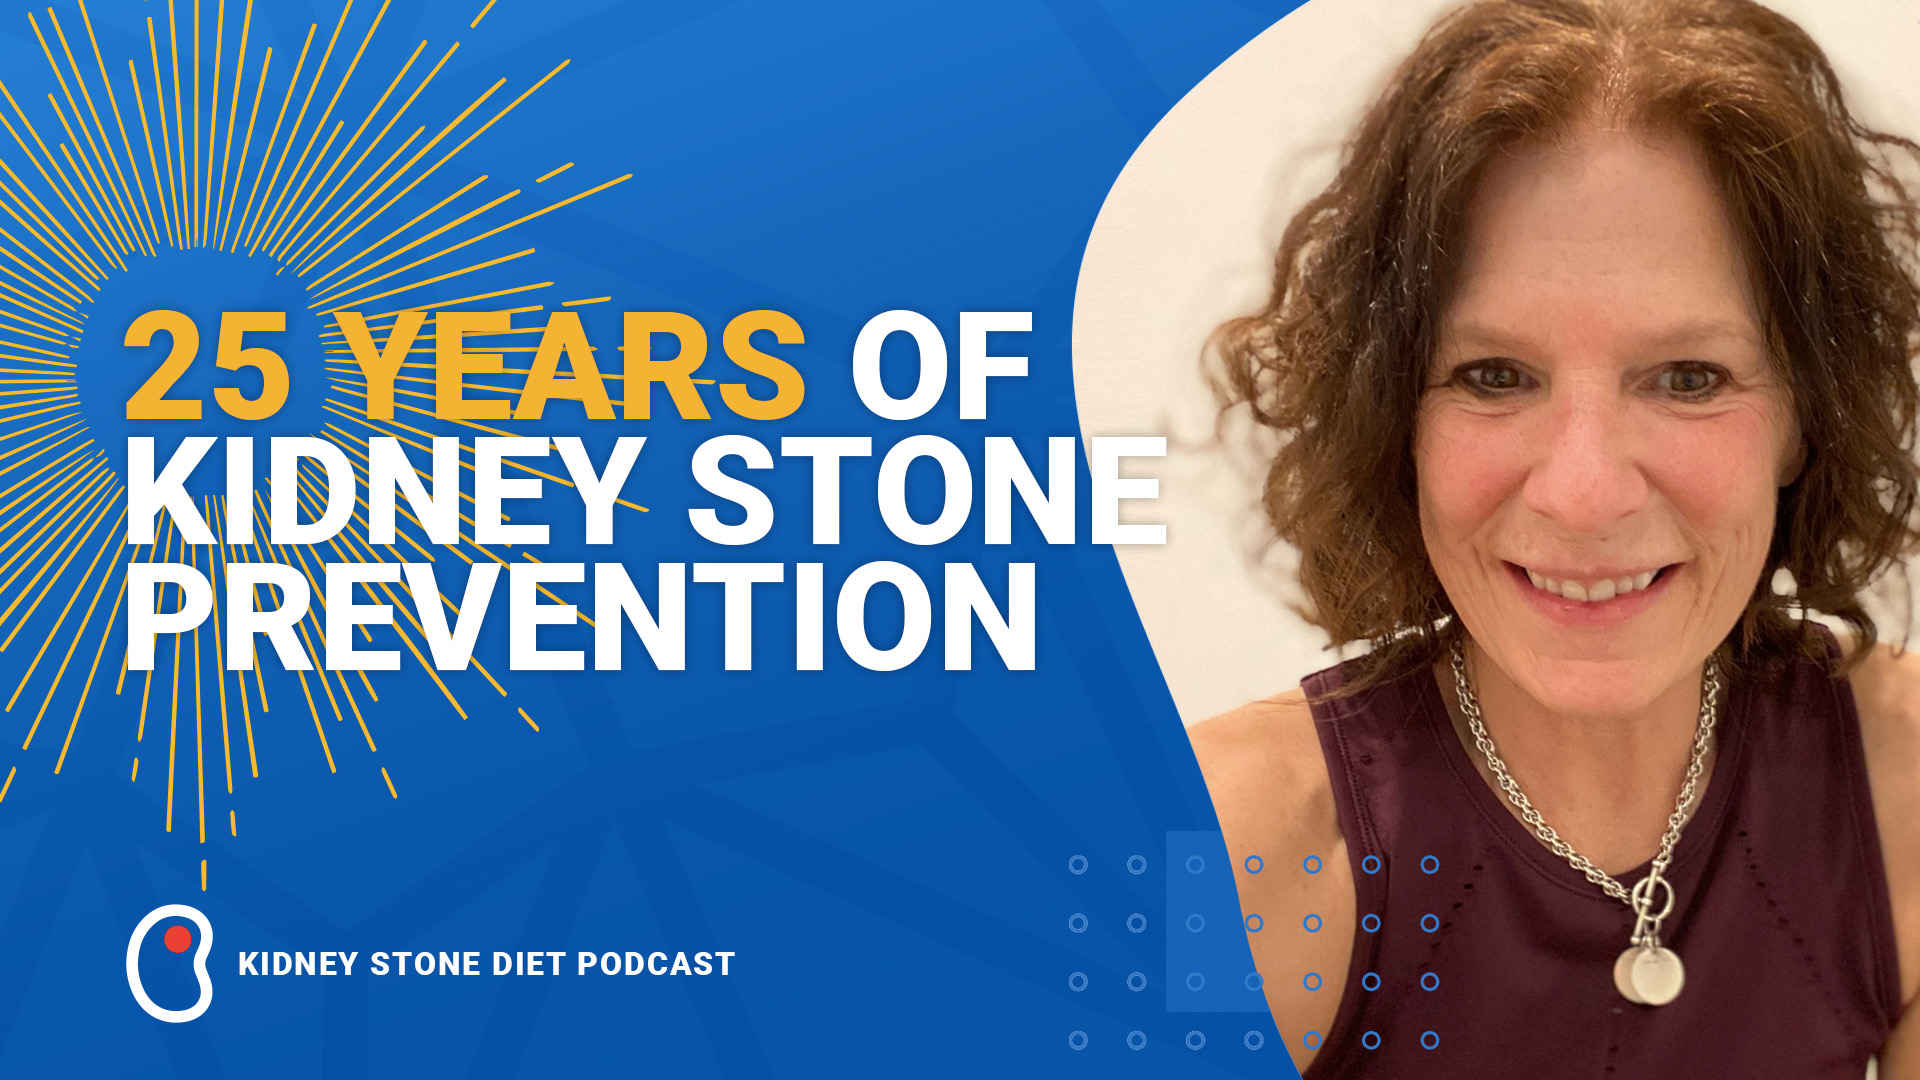 25 years of kidney stone prevention